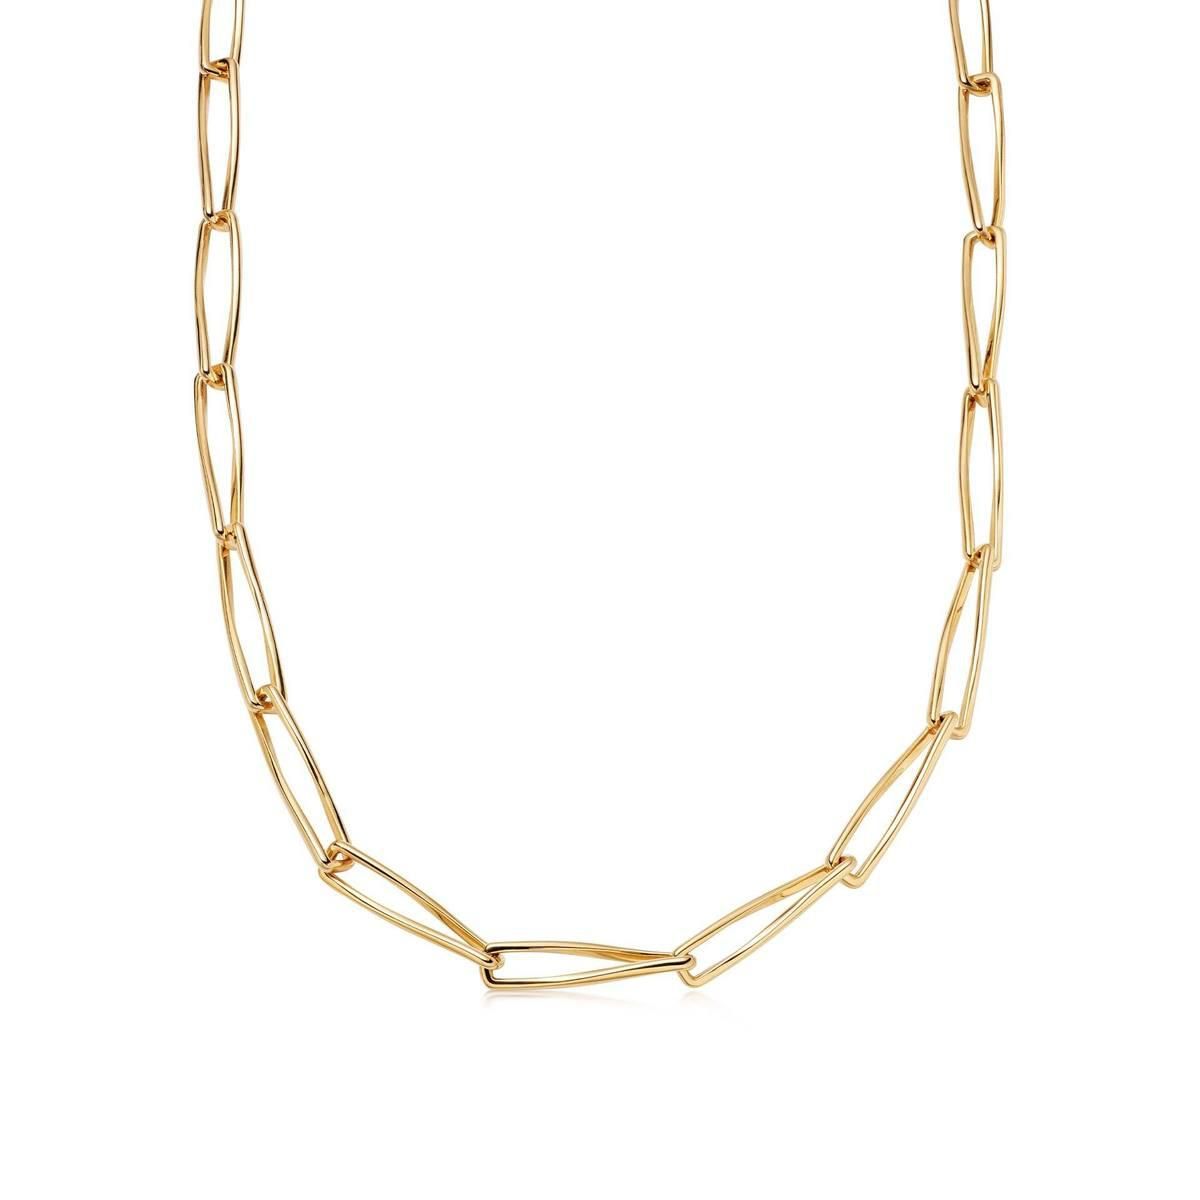 Gold Thin Pirouette Chain Necklace